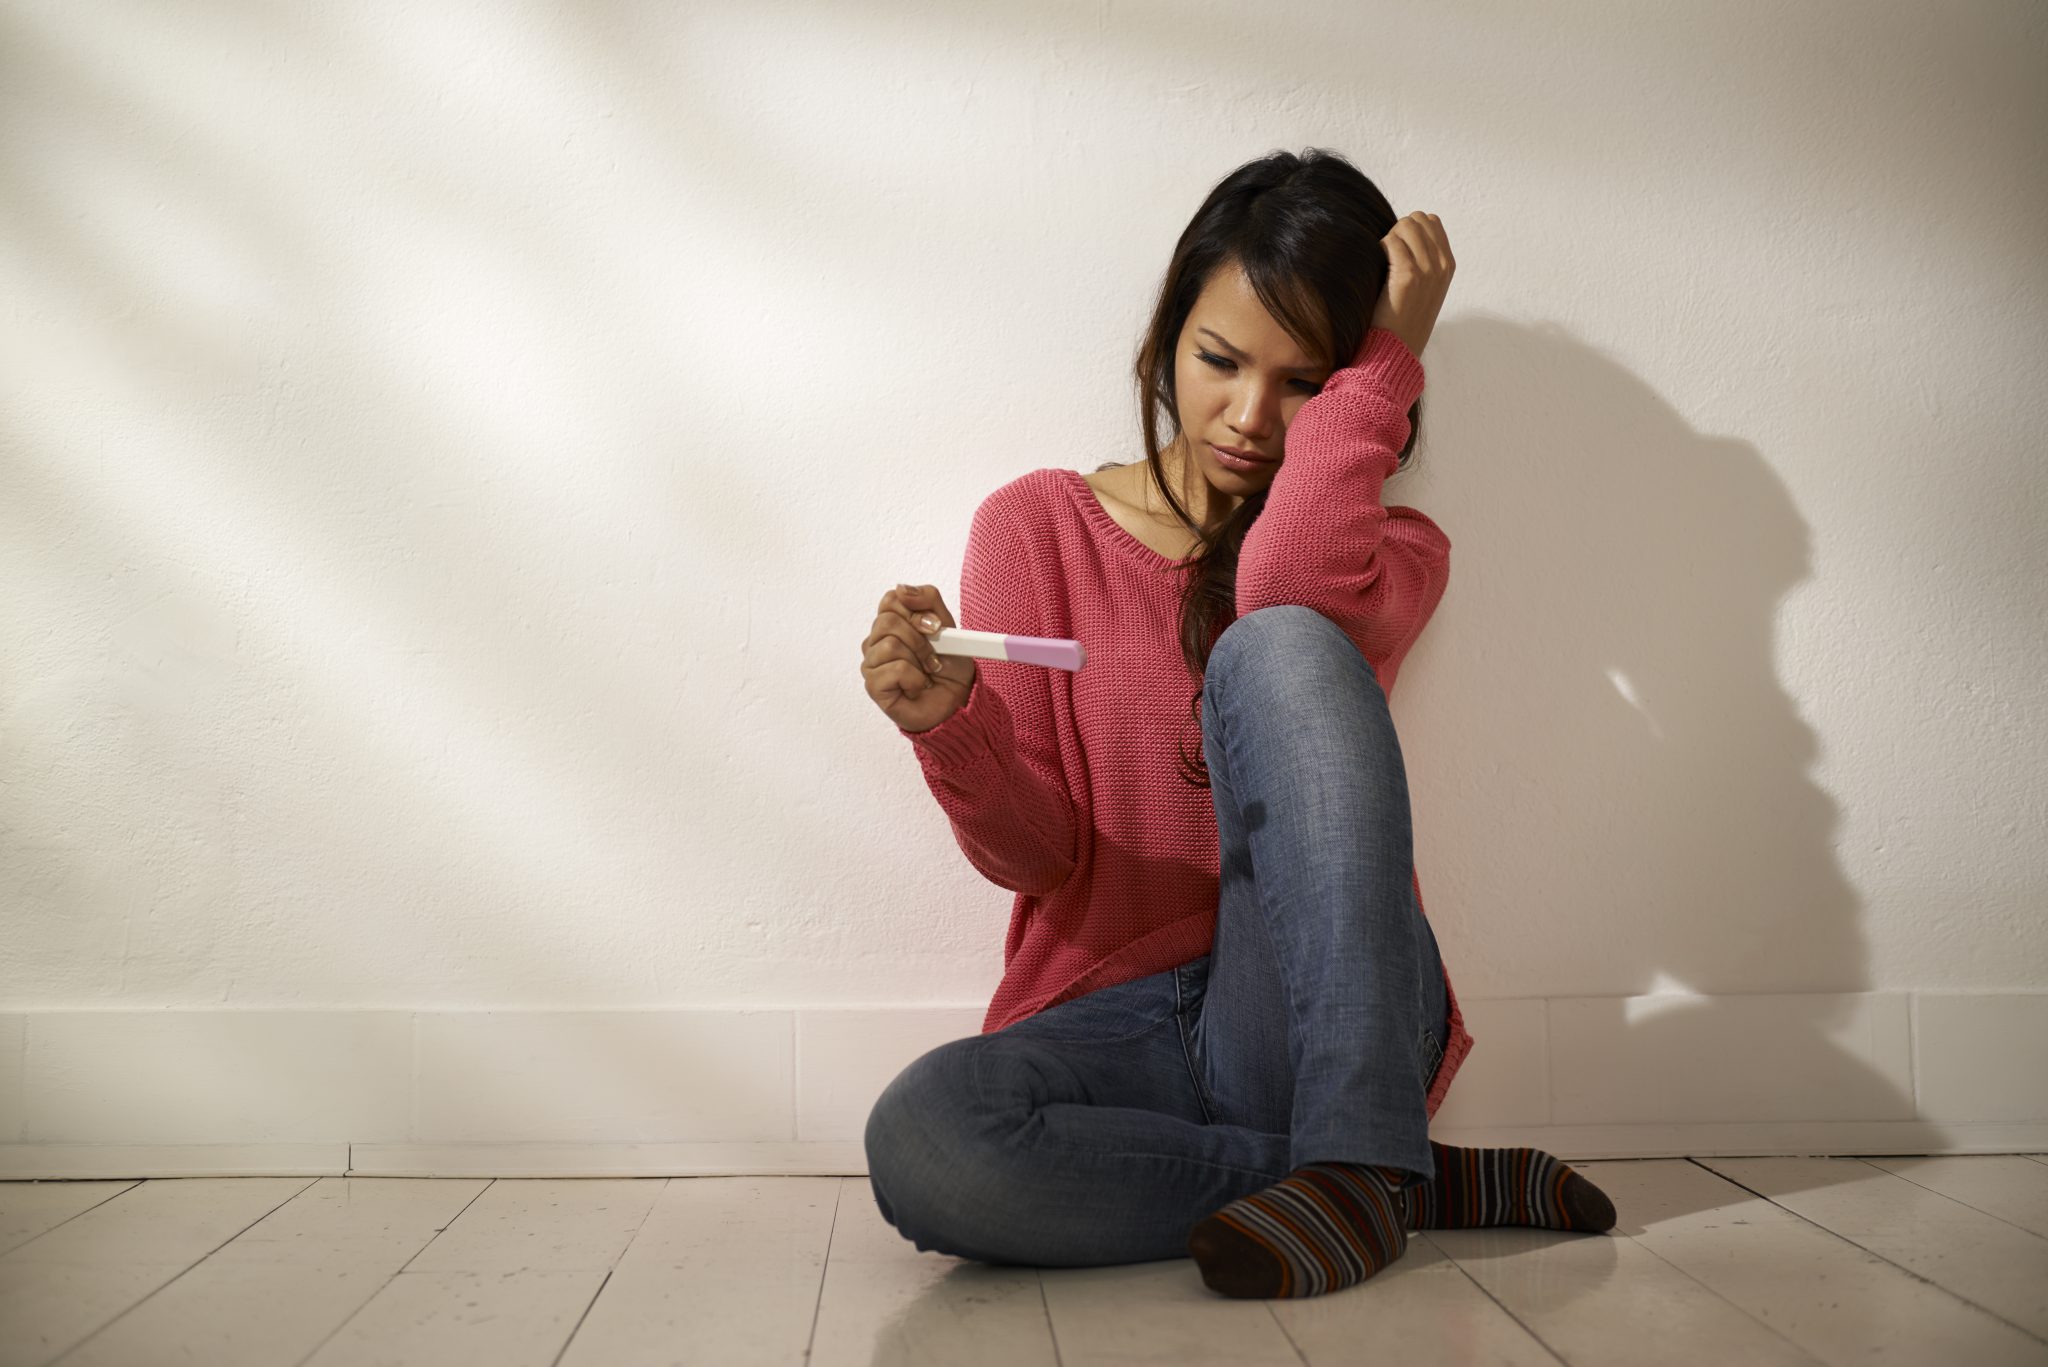 Stressed young woman looking at a pregnancy test